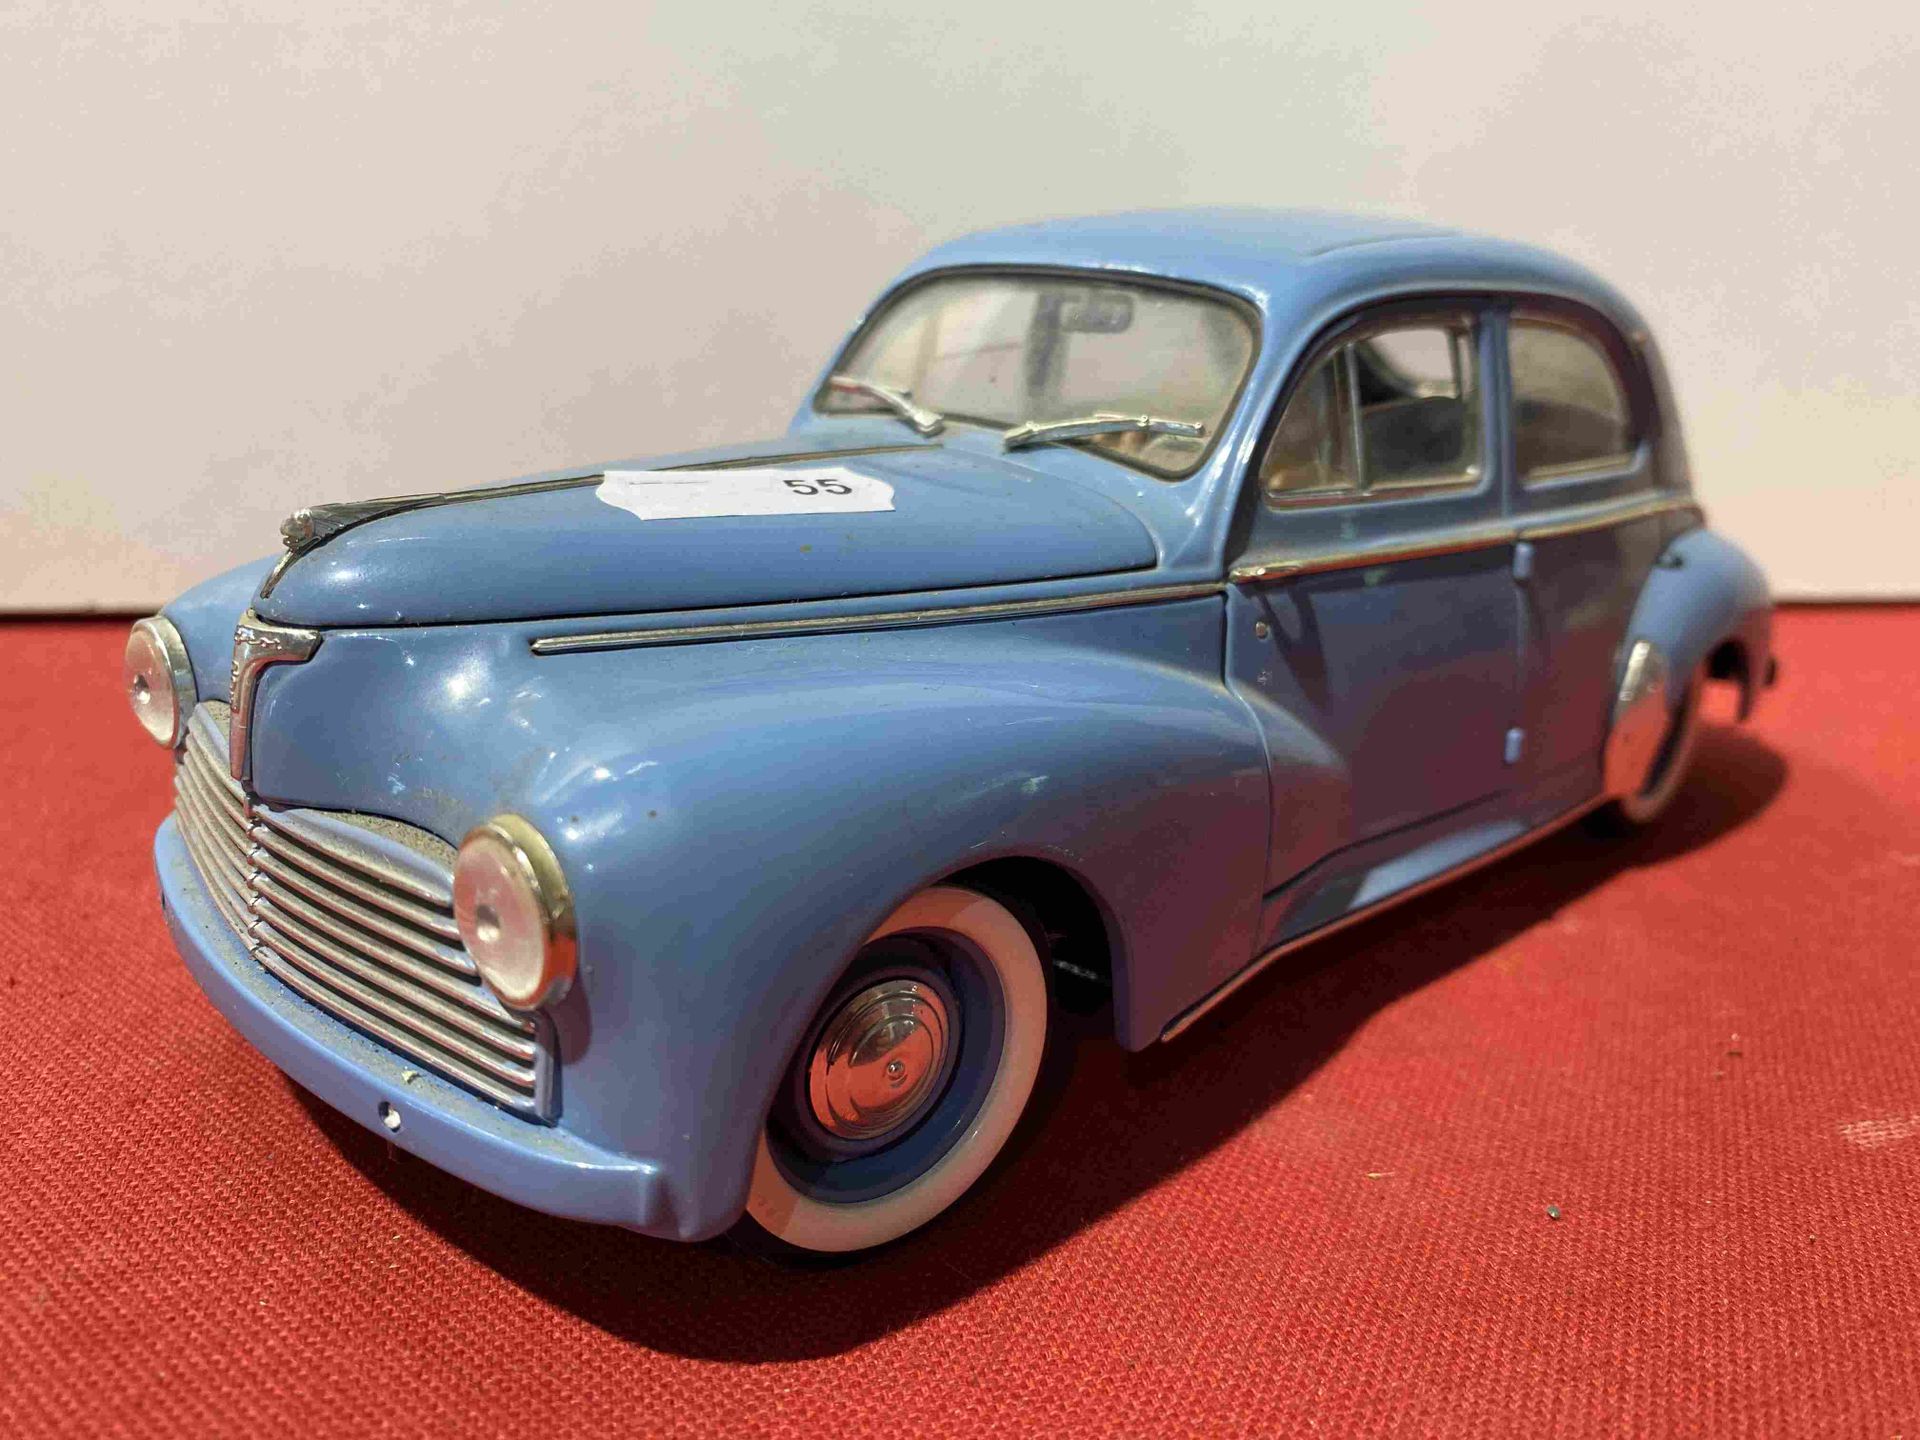 1 model car including: 1 PEUGEOT 203 1954 SOLIDO Scale 1…